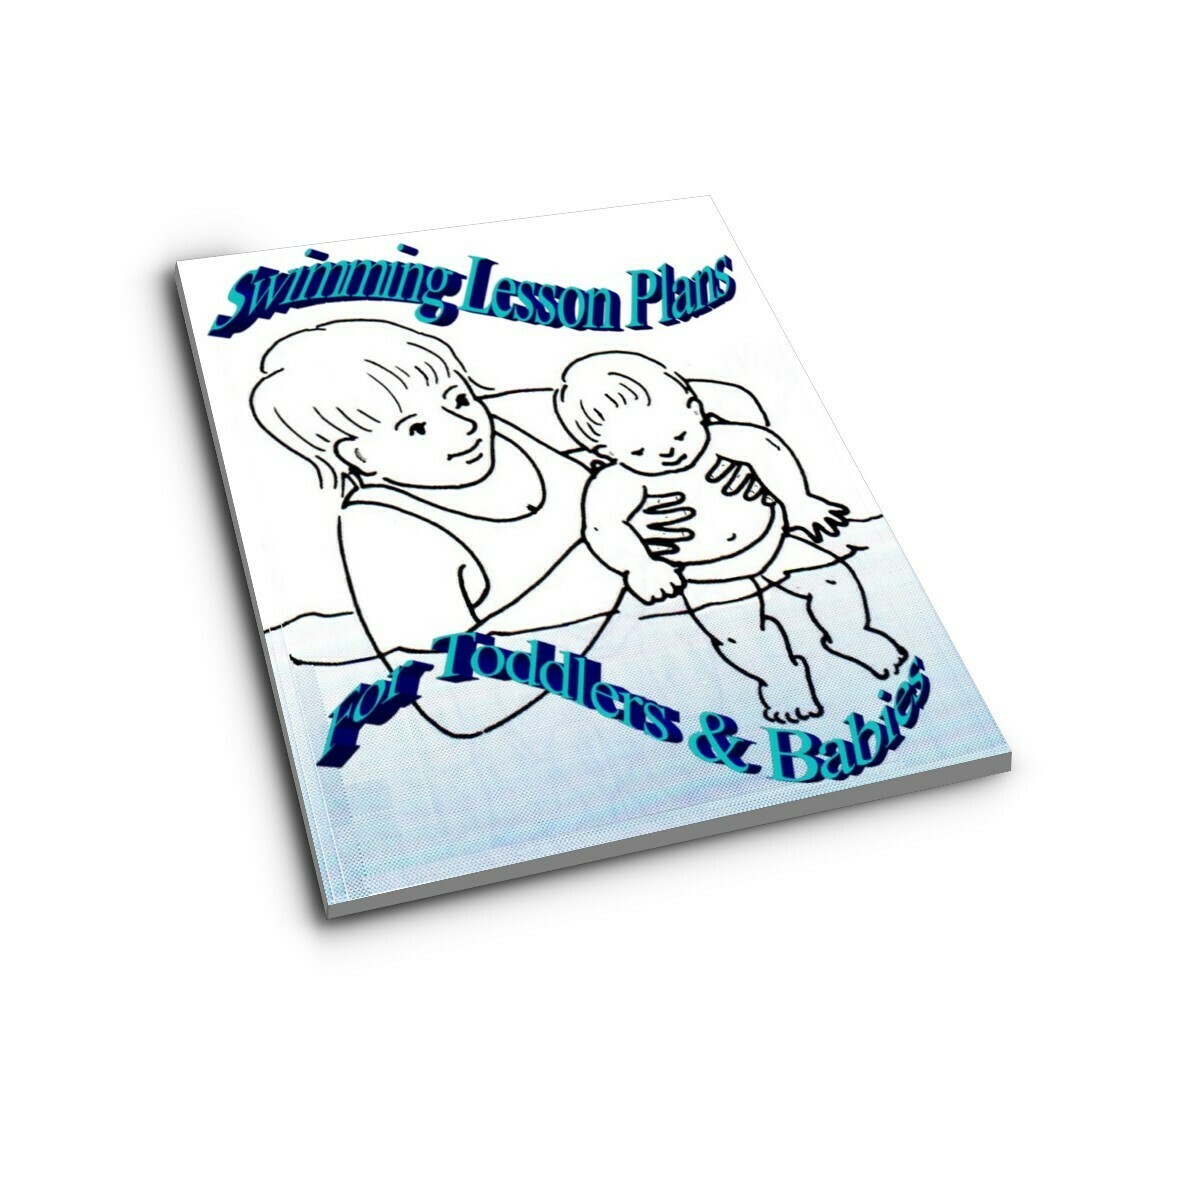 Swimming Lesson Plan For Parent-Teacher with Toddlers & Babies Companion. Fully Detailed with Images